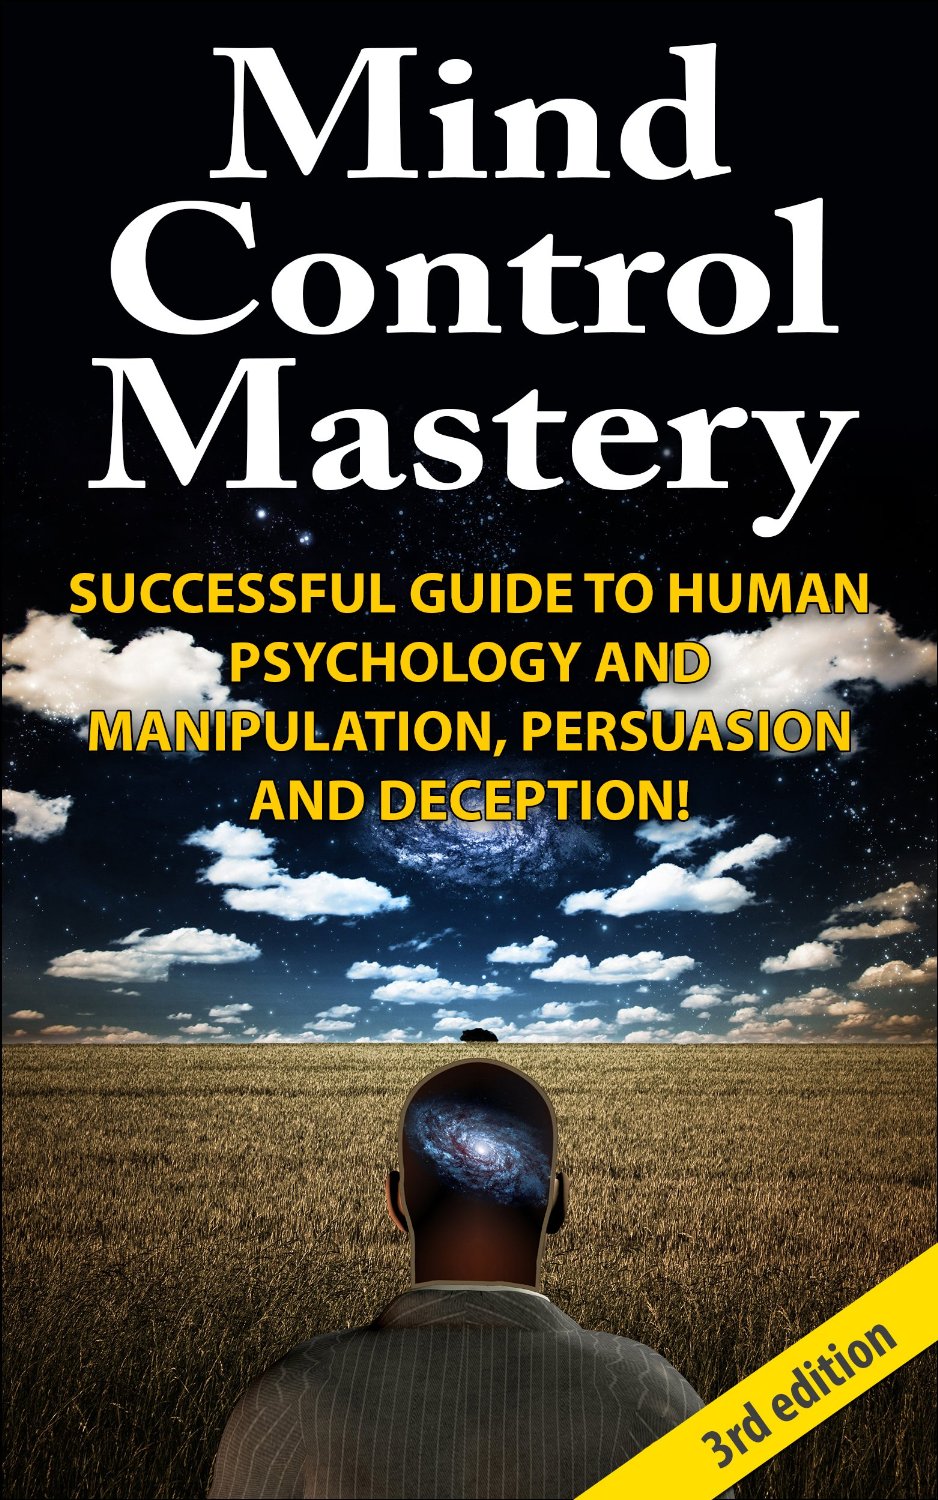 Mind Control Mastery 3rd Edition: Successful Guide to Human Psychology and Manipulation, Persuasion and Deception!(BONUS INSIDE) (Mind Control, Manipulation, … Psychology, Intuition, Manifestation,) by Jeffrey Powell